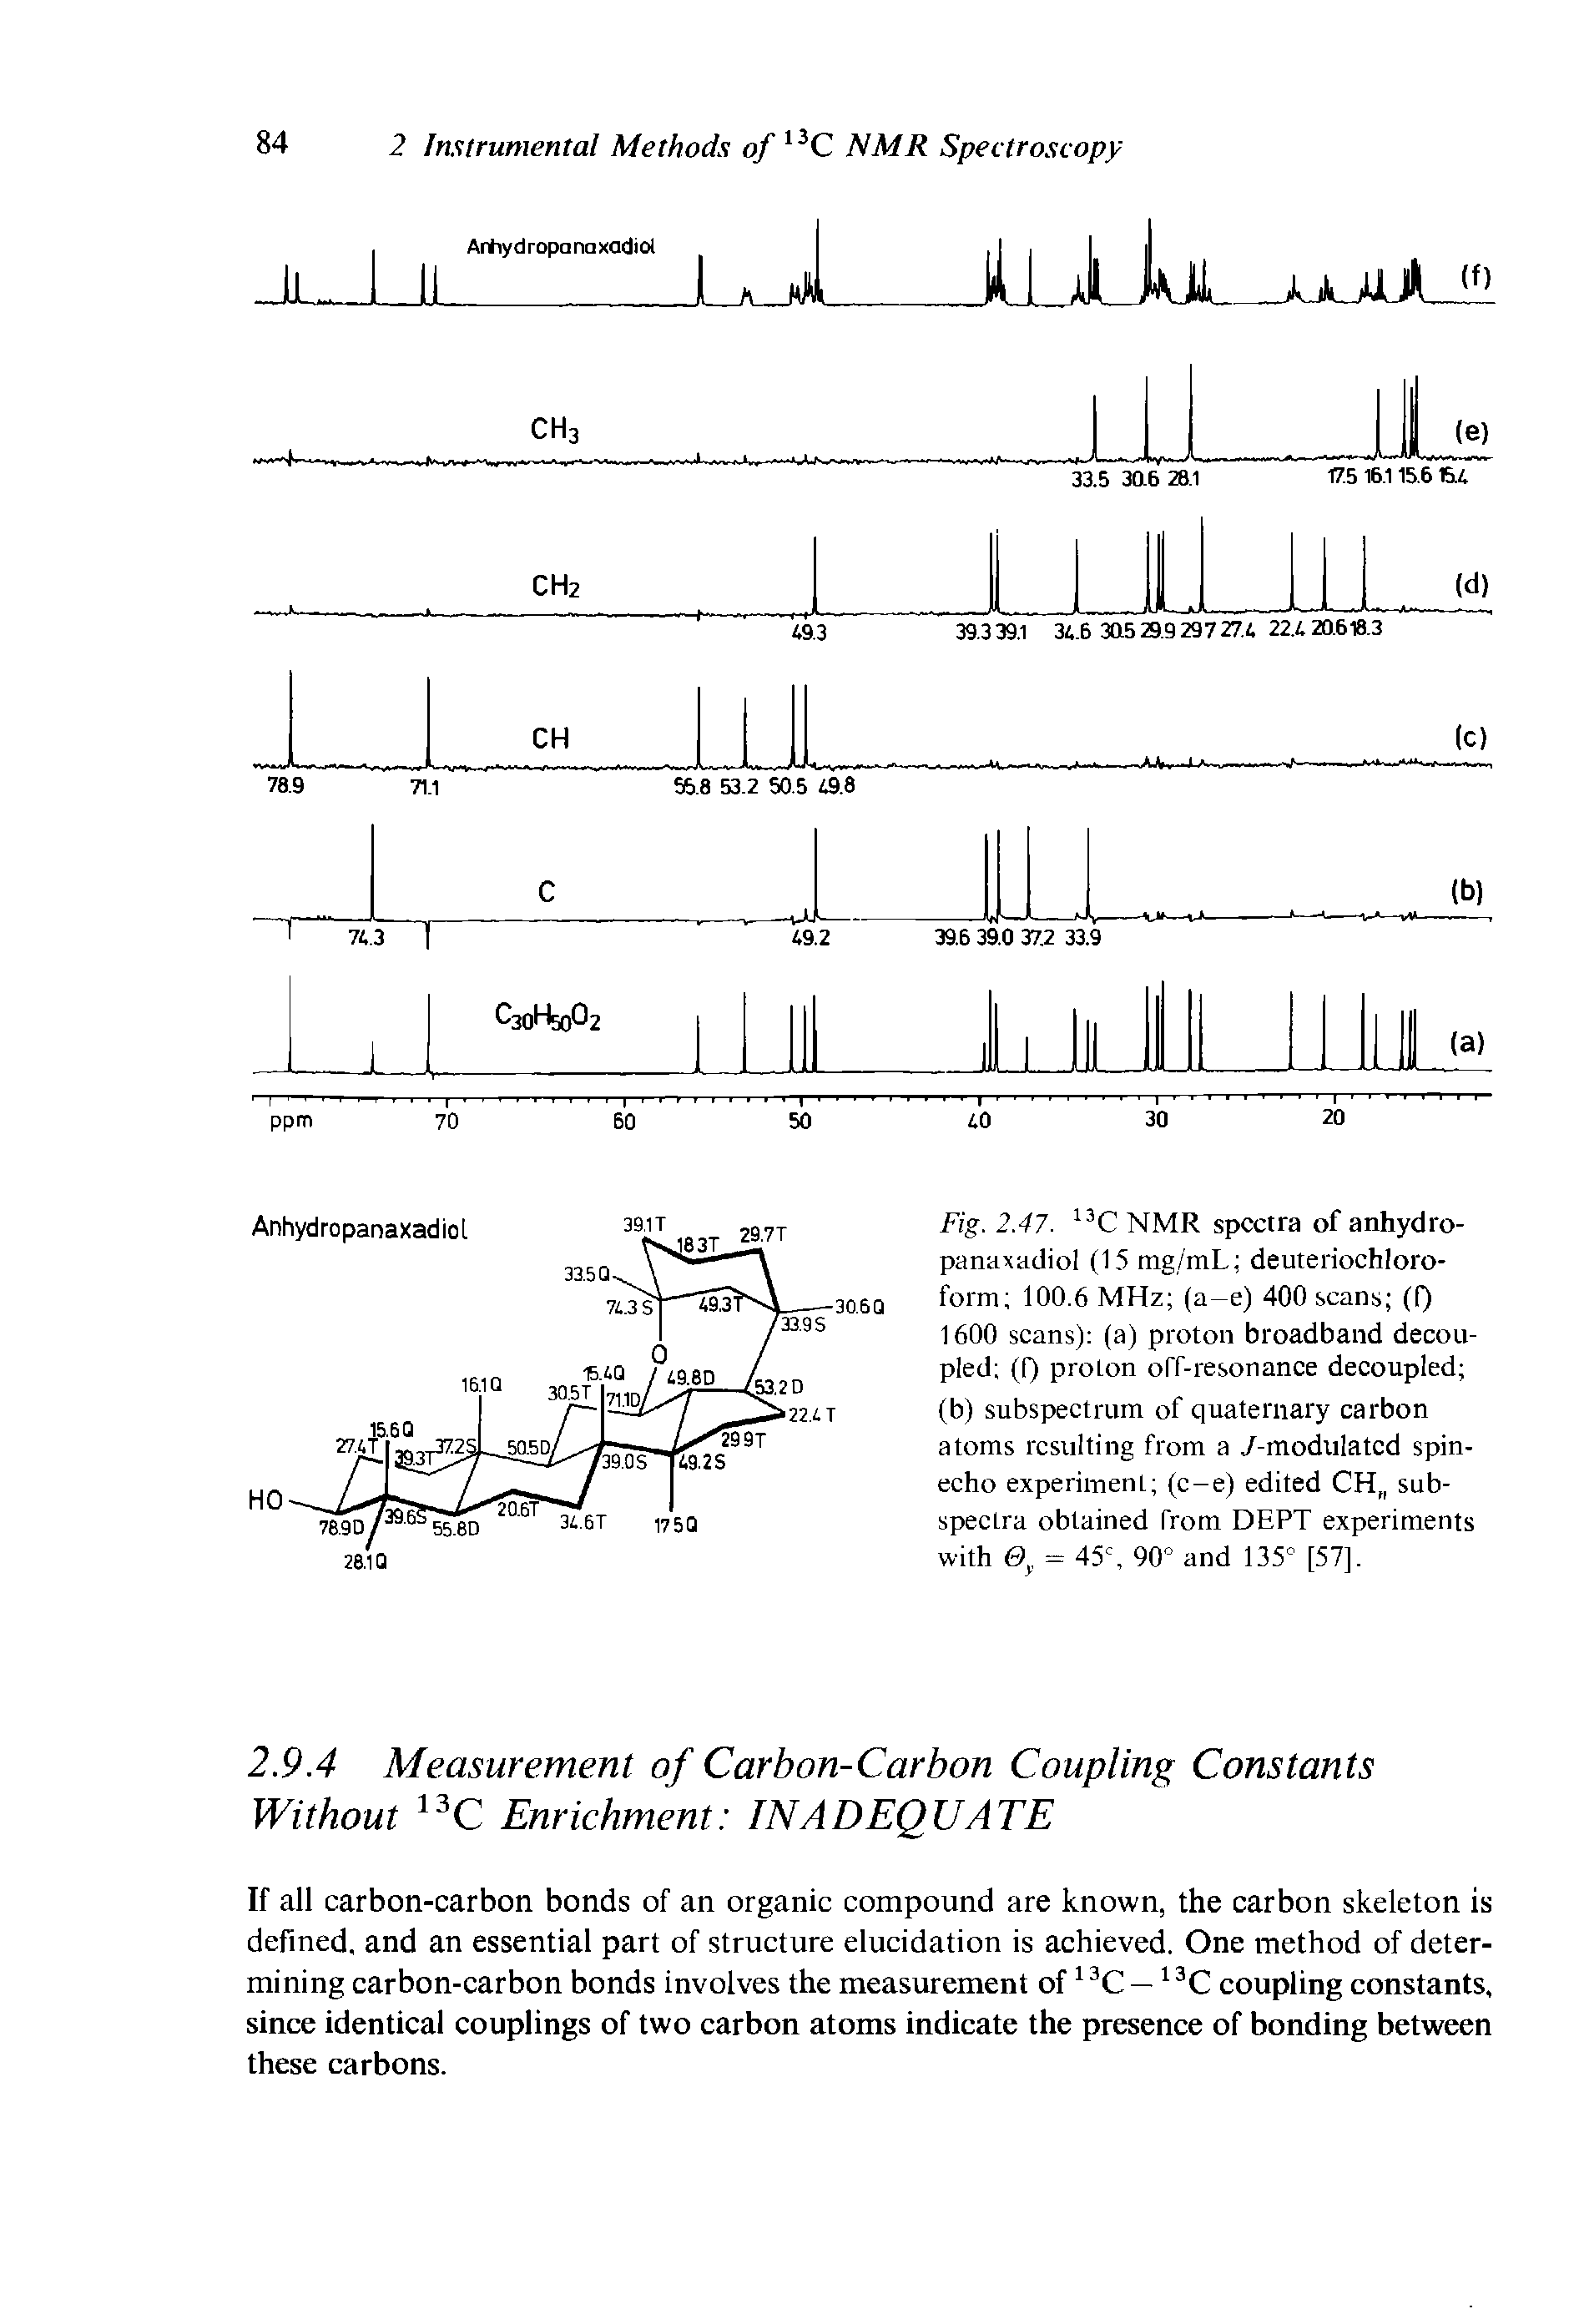 Fig. 2.47. 13C NMR spectra of anhydro-panaxadiol (15 tng/mL deuteriochloro-form 100.6 MHz (a-e) 400 scans (f) 1600 scans) (a) proton broadband decoupled (f) proton off-resonance decoupled (b) subspectrum of quaternary carbon atoms resulting from a /-modulated spin-echo experiment (c-e) edited CH(I subspectra obtained from DEPT experiments with 0f = 45c, 90° and 135° [57],...